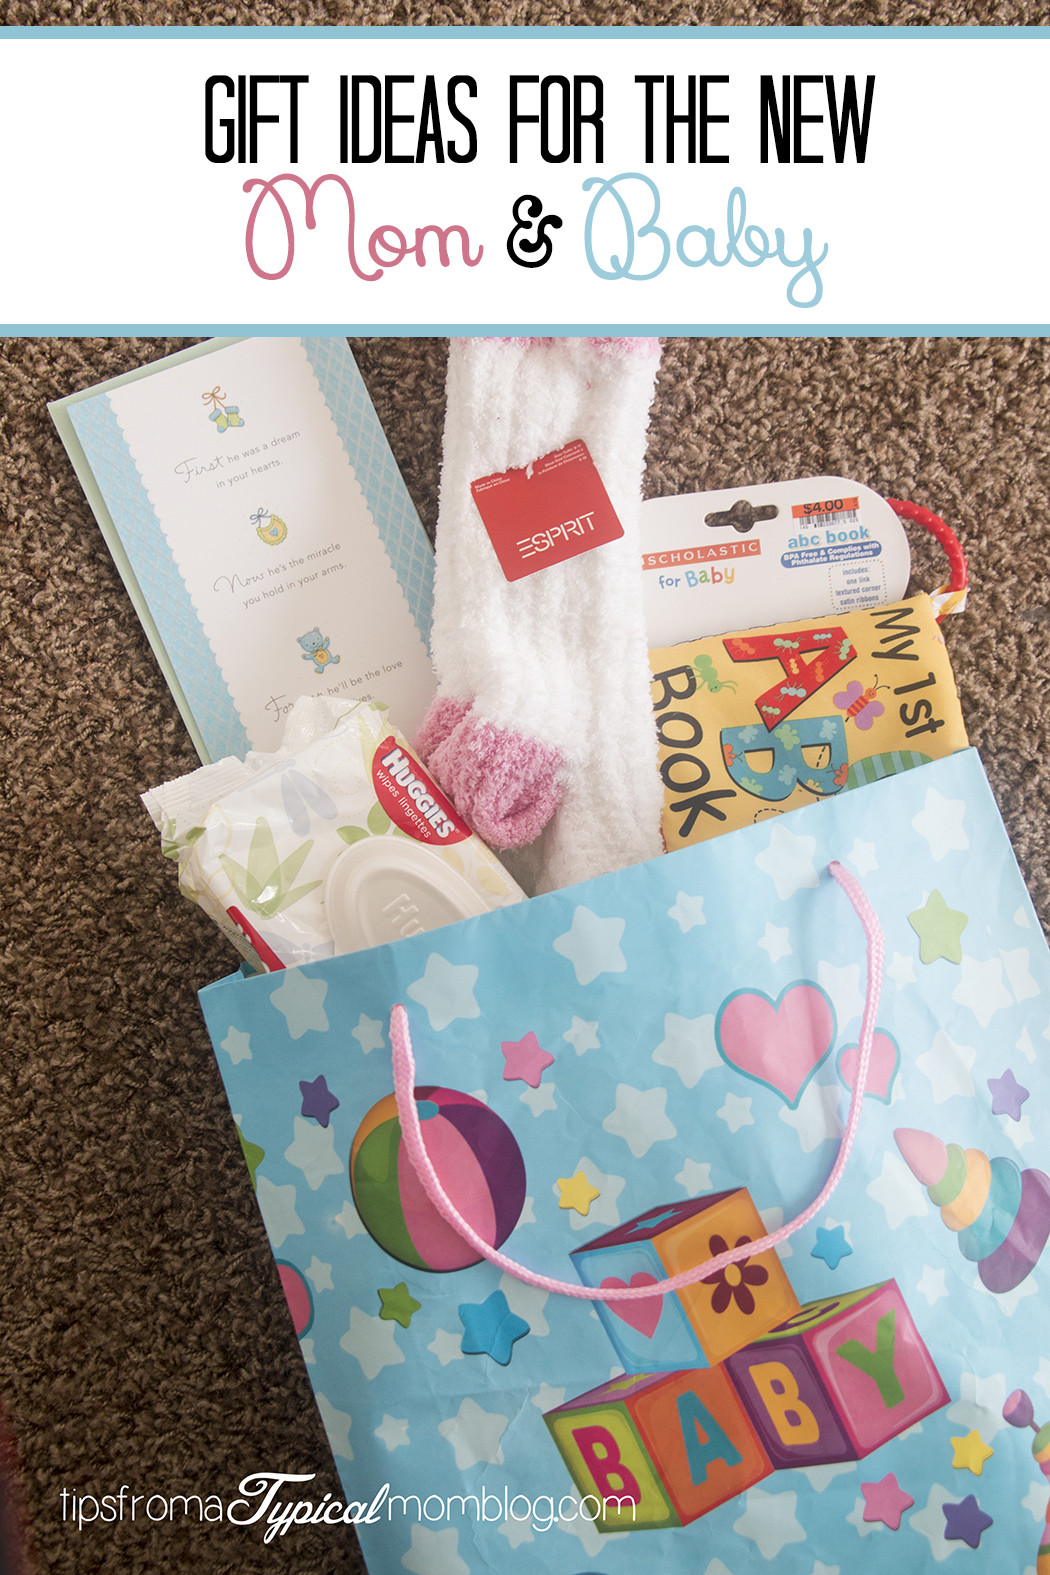 Gift Ideas For New Mothers
 Gift Ideas for the New Mom and Baby Tips from a Typical Mom